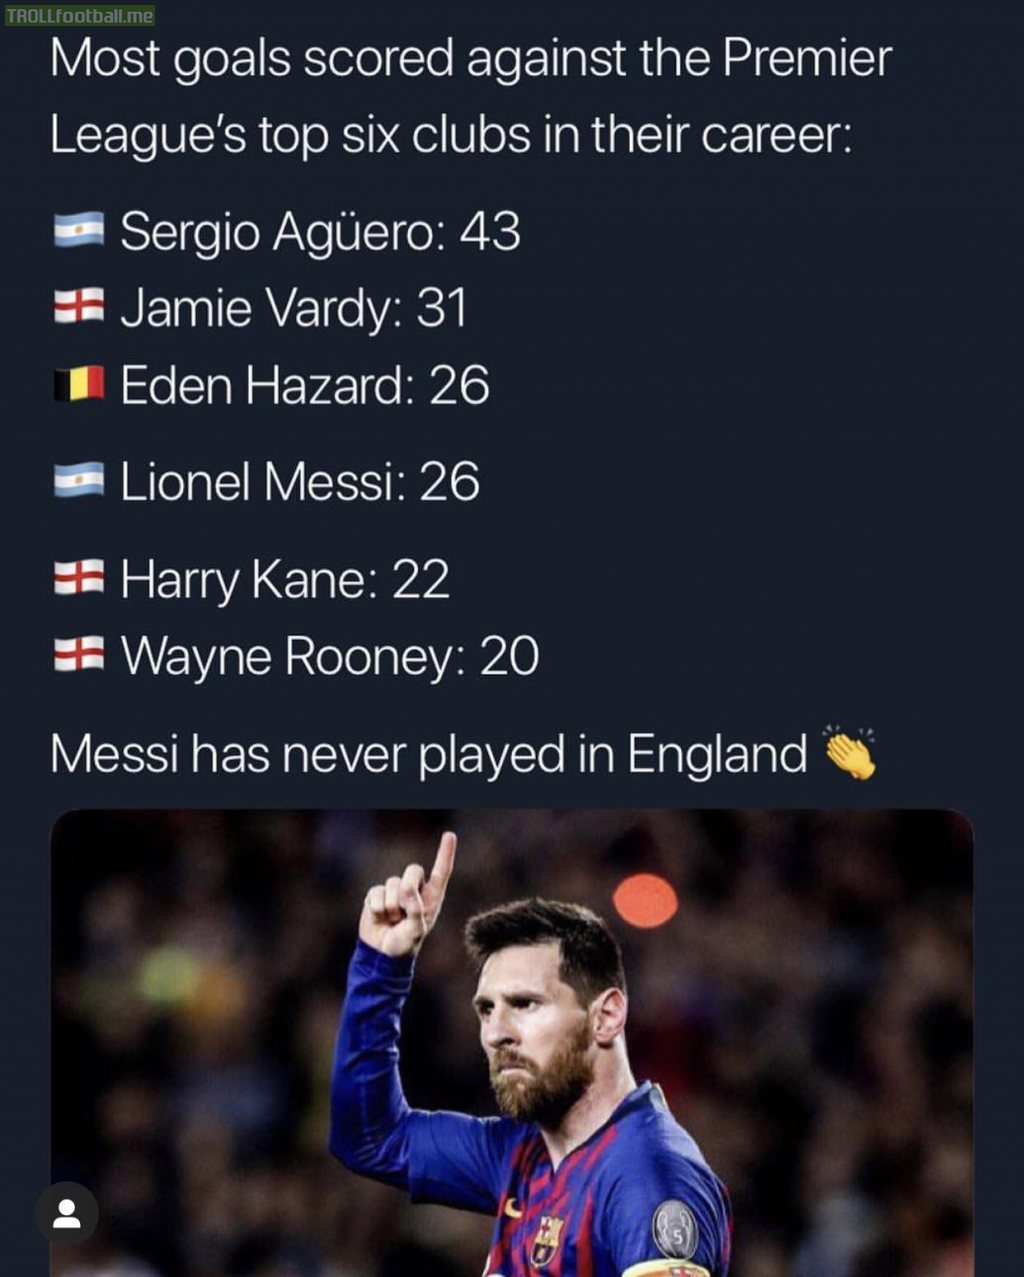 Messi has scored more goals against the premier leagues top 6 clubs than Wayne Rooney.